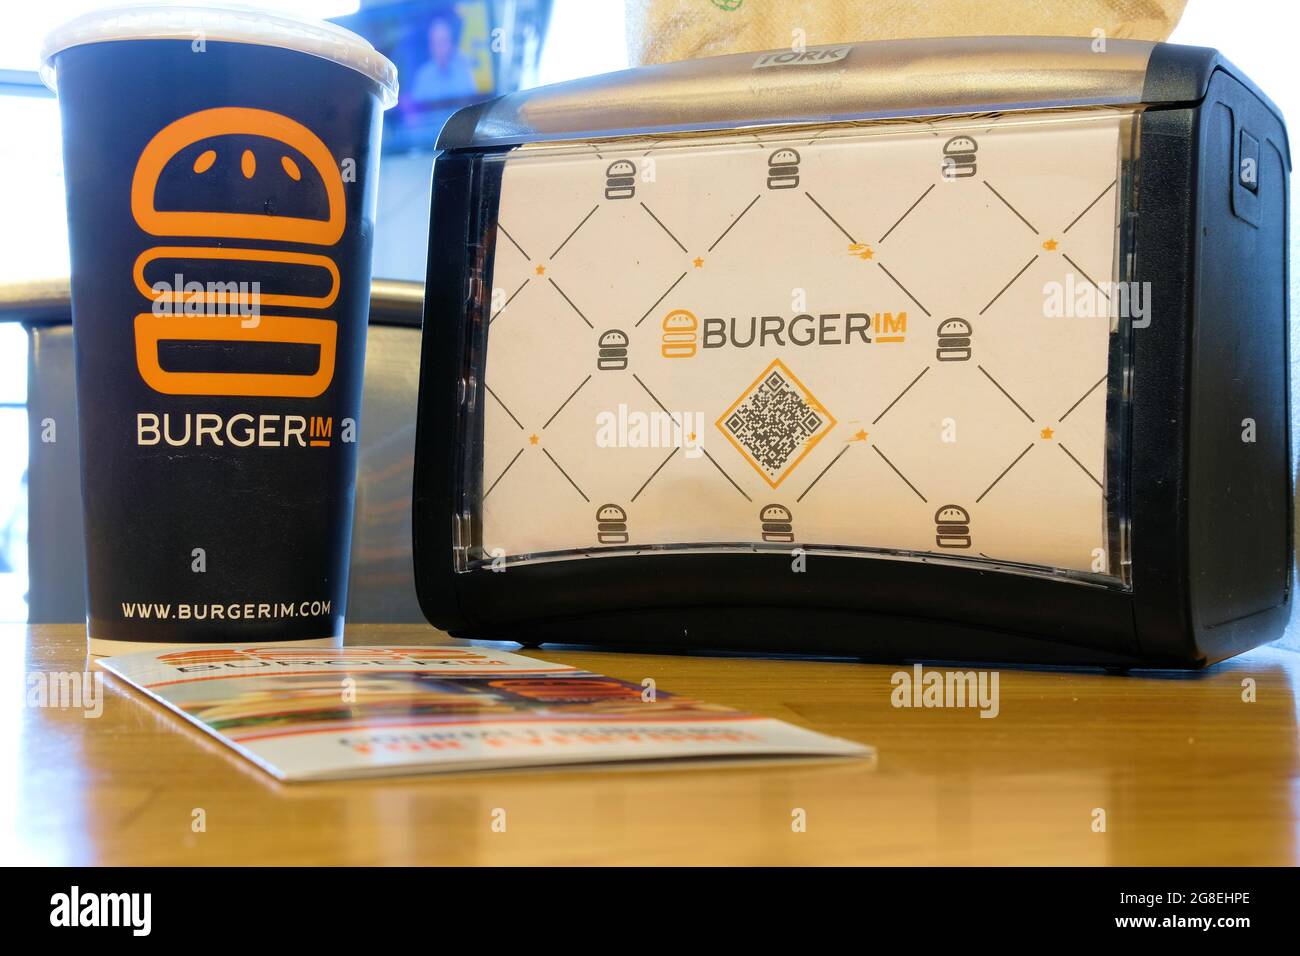 Drink cup, napking dispenser, and brochure at a Burgerim restaurant; an Israeli fast food hamburger franchise featuring fast-casual gourmet burgers. Stock Photo